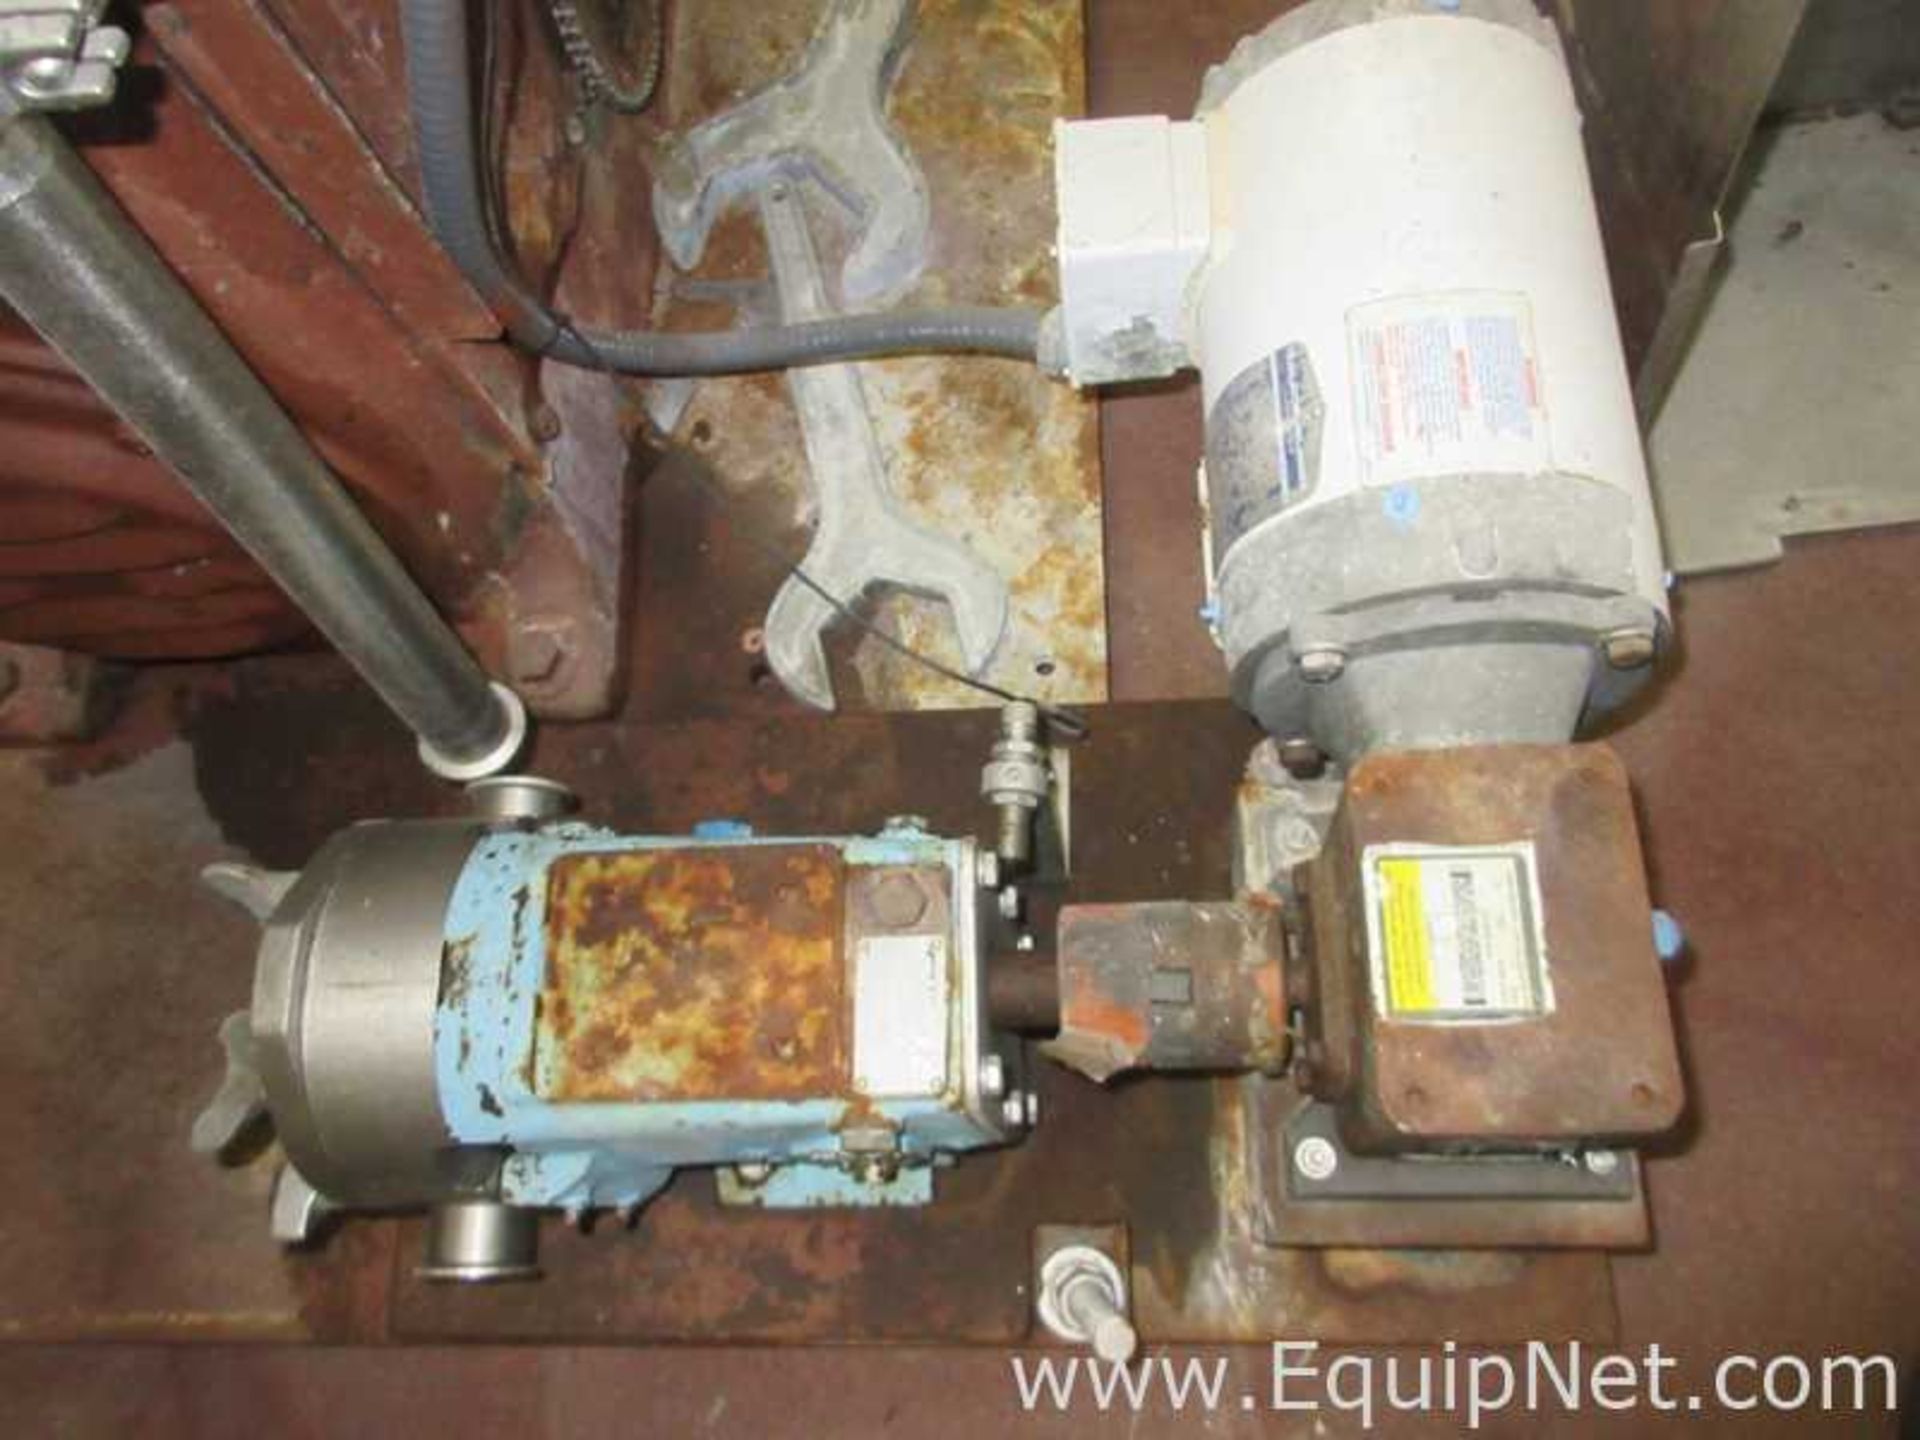 Whipper And Waukesha Positive Displacement Pump - Image 4 of 12